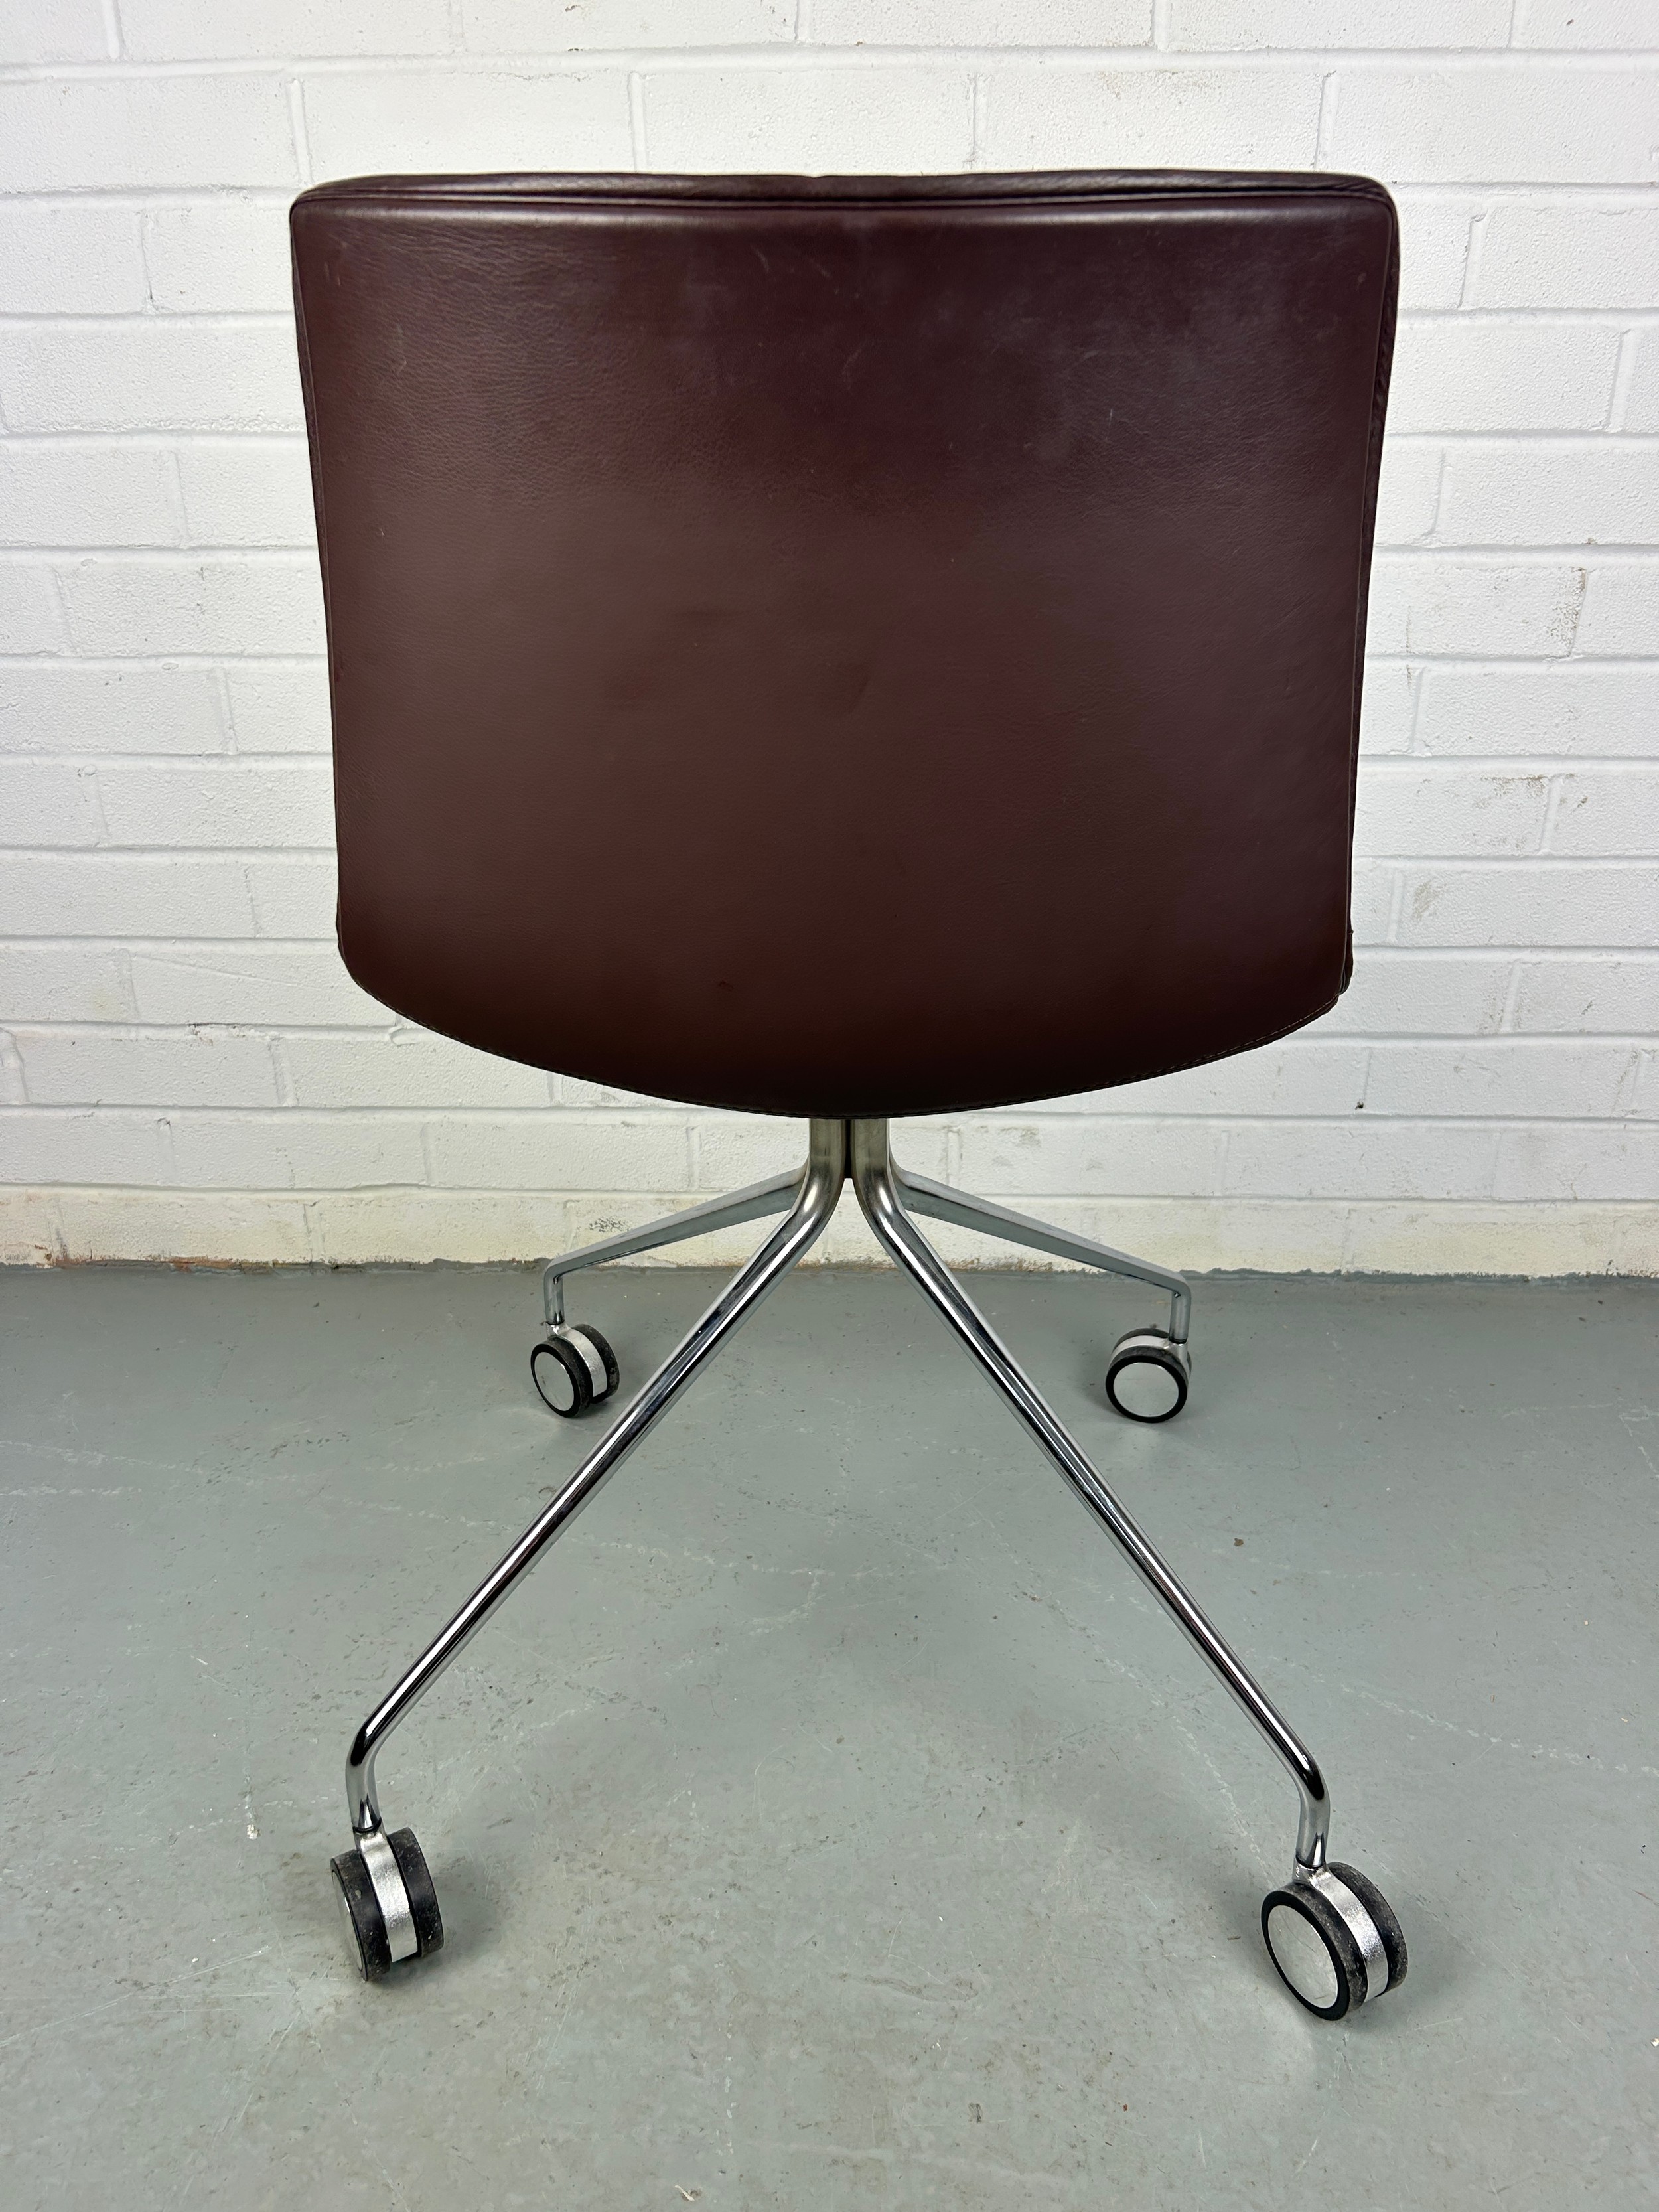 A BROWN LEATHER SWIVEL CHAIR BY ARPEL, 80cm x 47cm x 41cm - Image 4 of 4